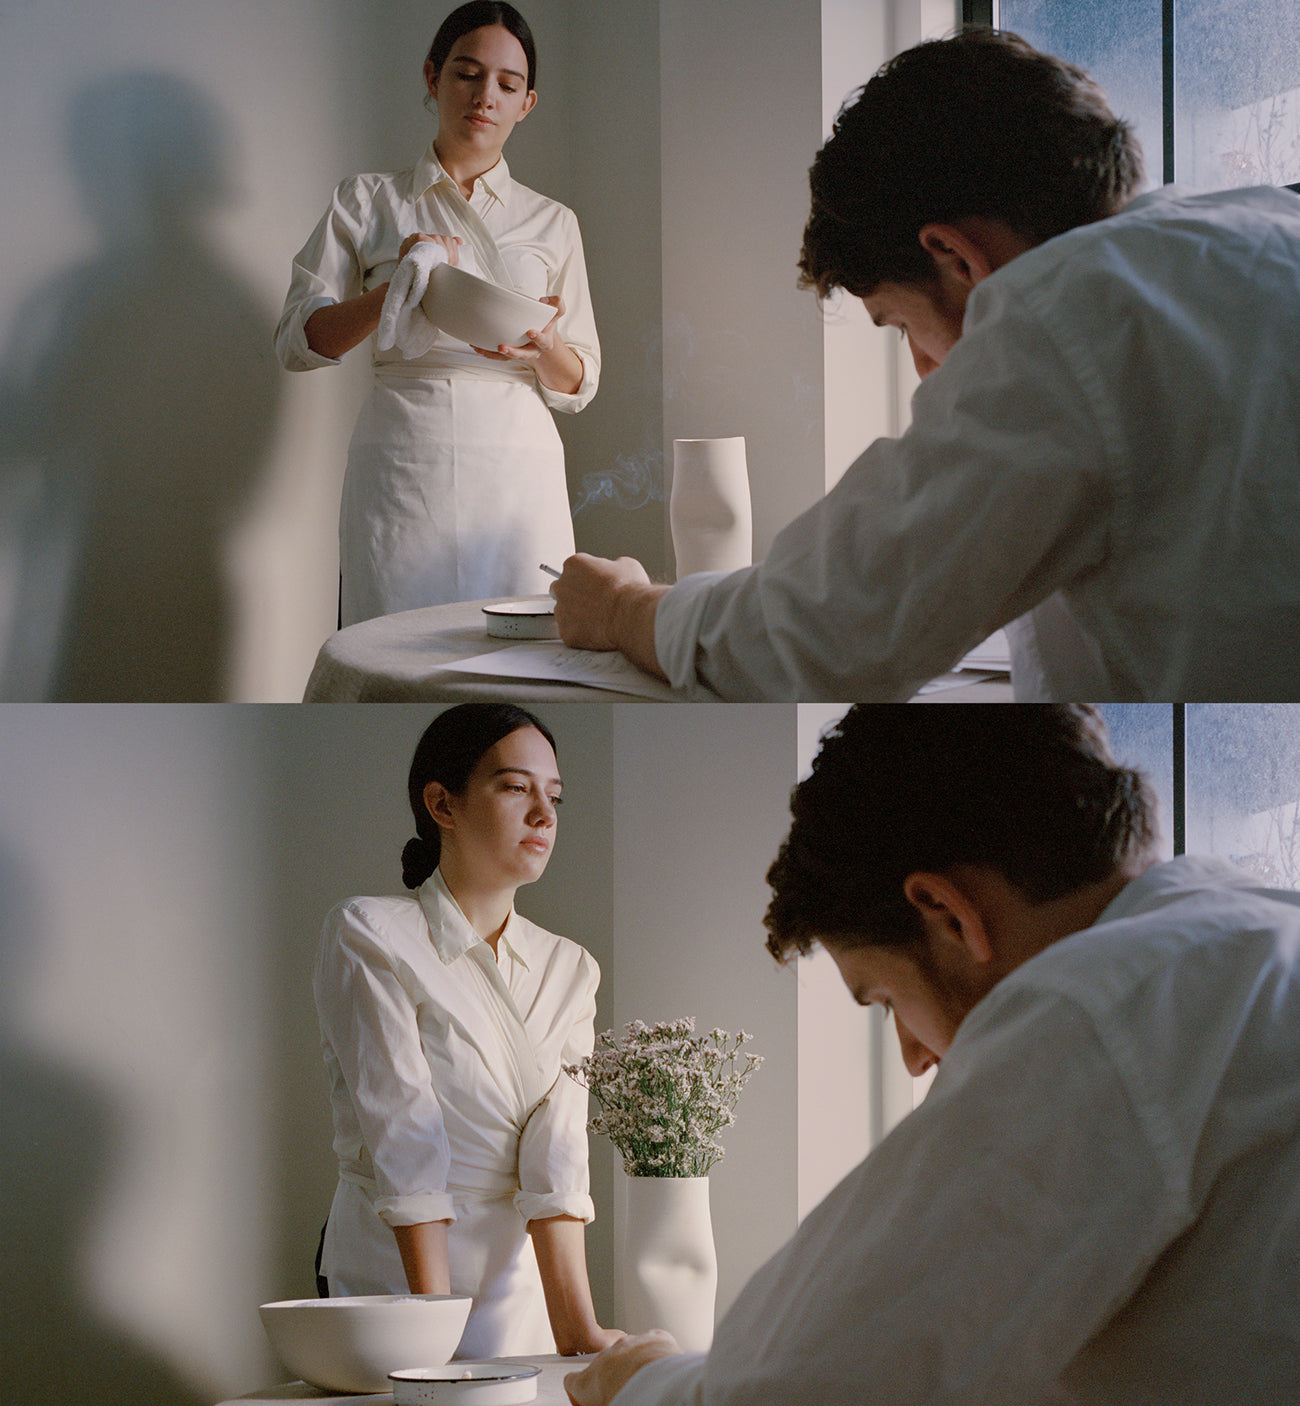 lady in white housekeeper's outfit across from guy writing something on paper, ceramic porcelain on table